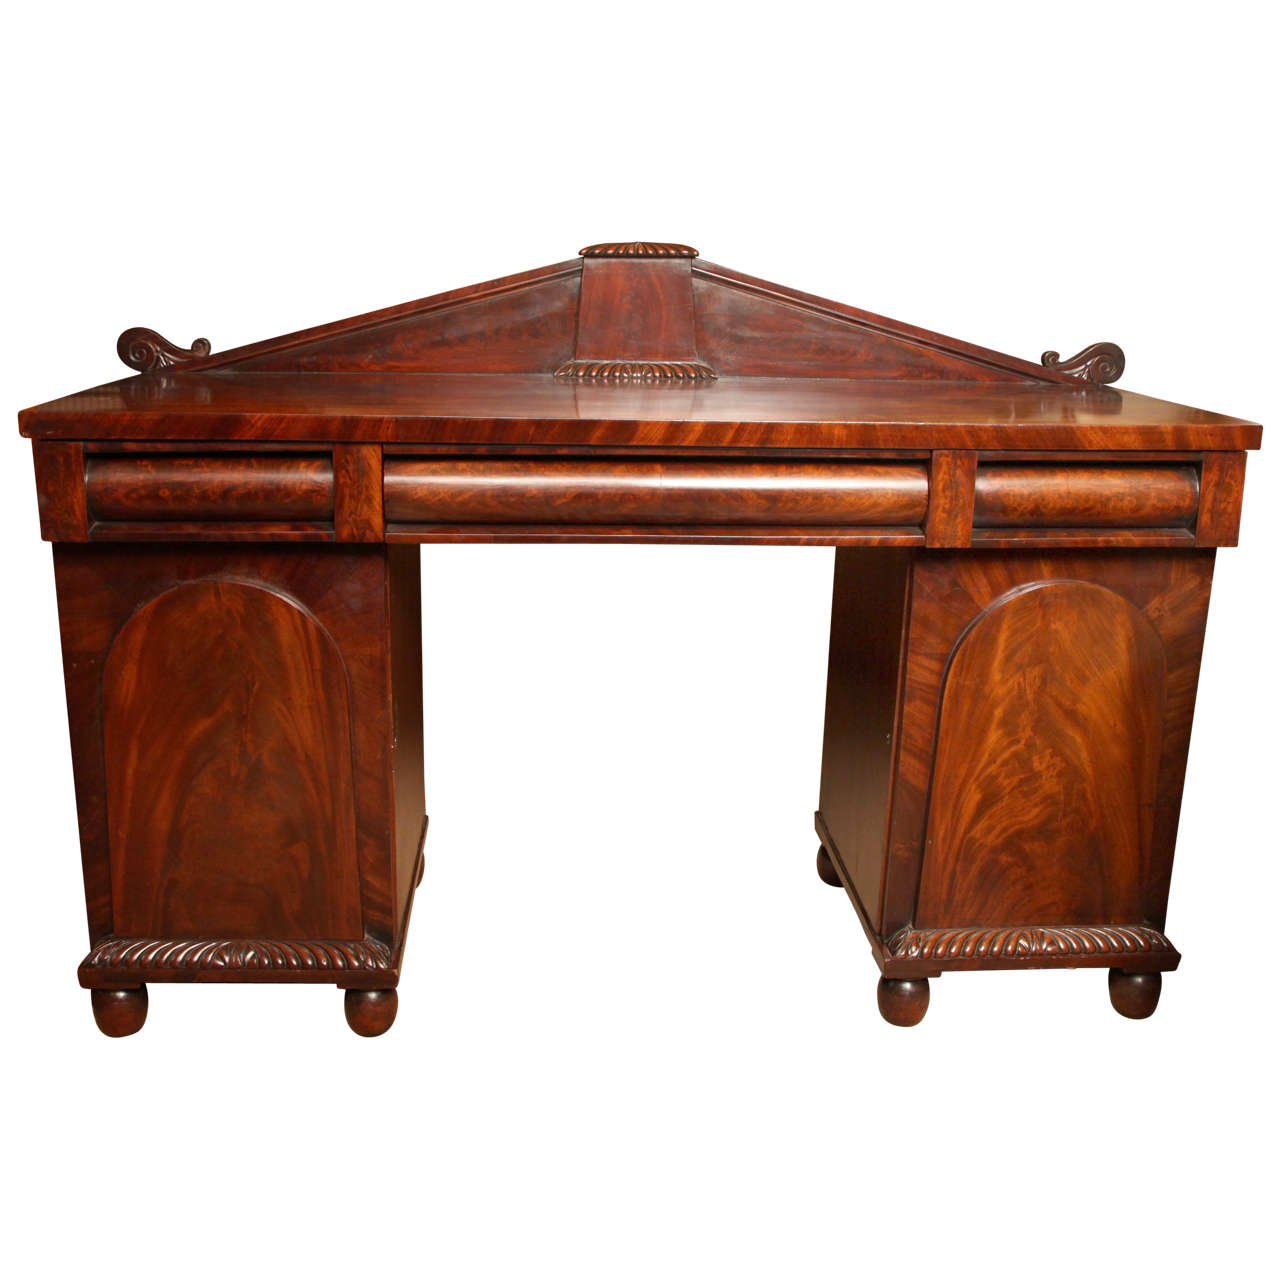 Early 19th Century English, Mahogany Double Pedestal Sideboard For Sale